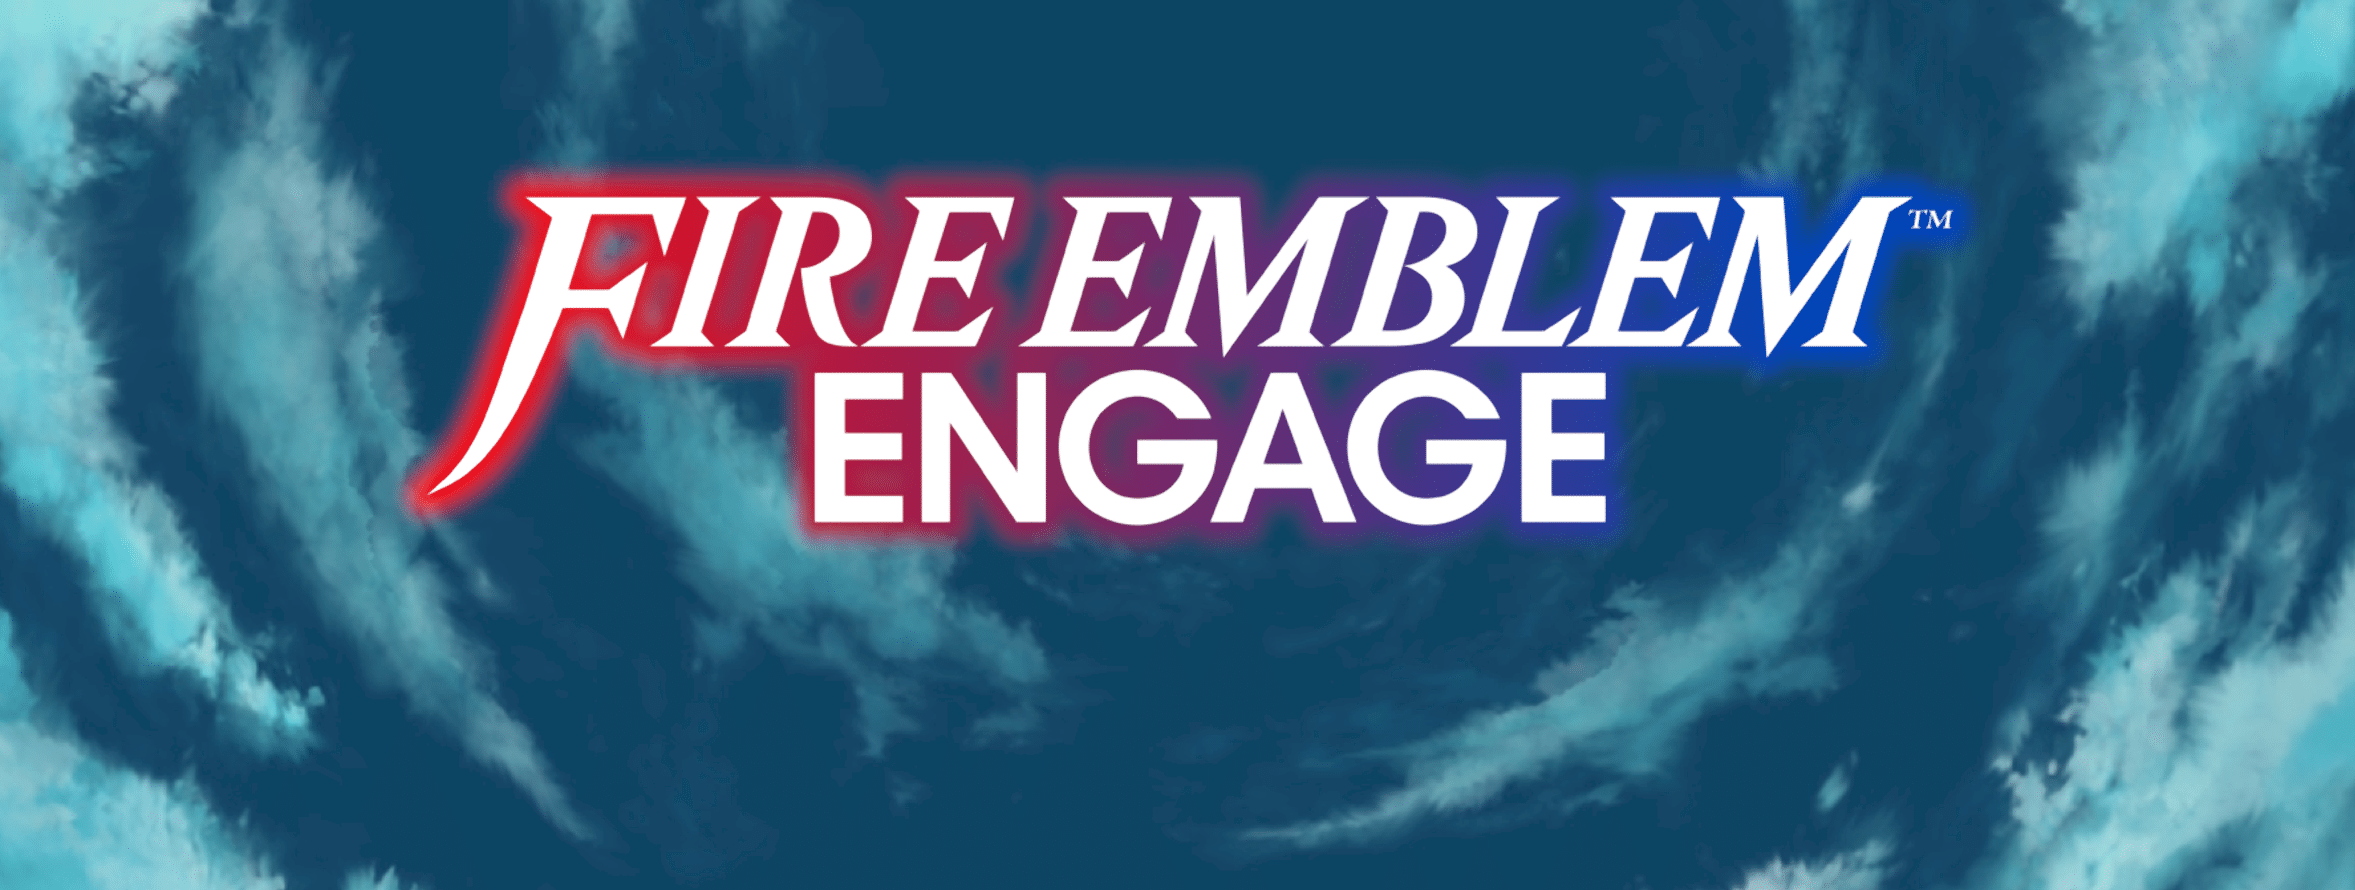 Fire Emblem Engage Characters Tier List, Which Are the Best?